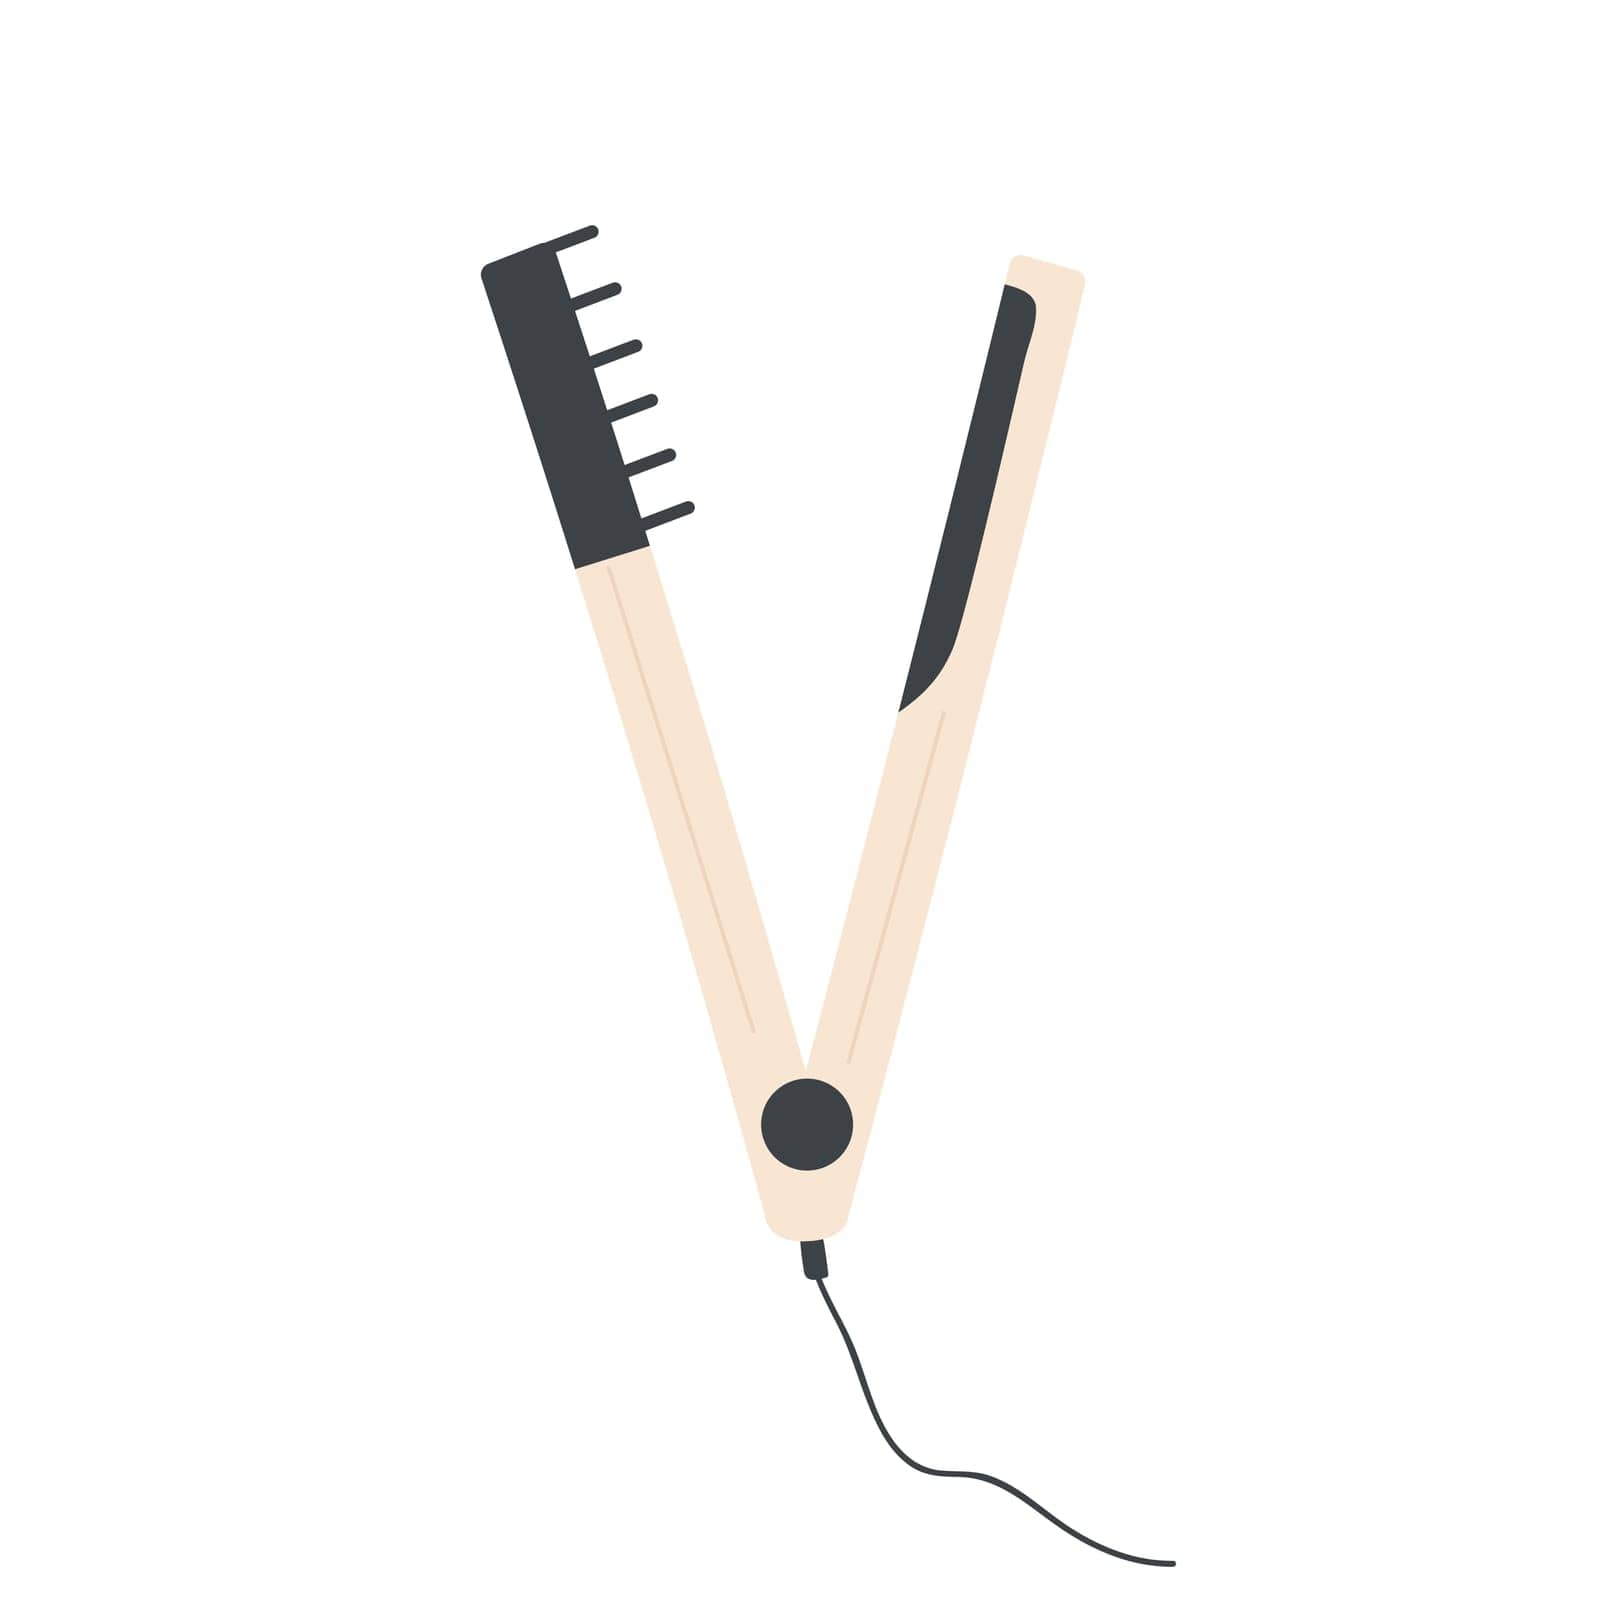 Hair care electronic tool. Styling hair device, beauty care routine vector illustration